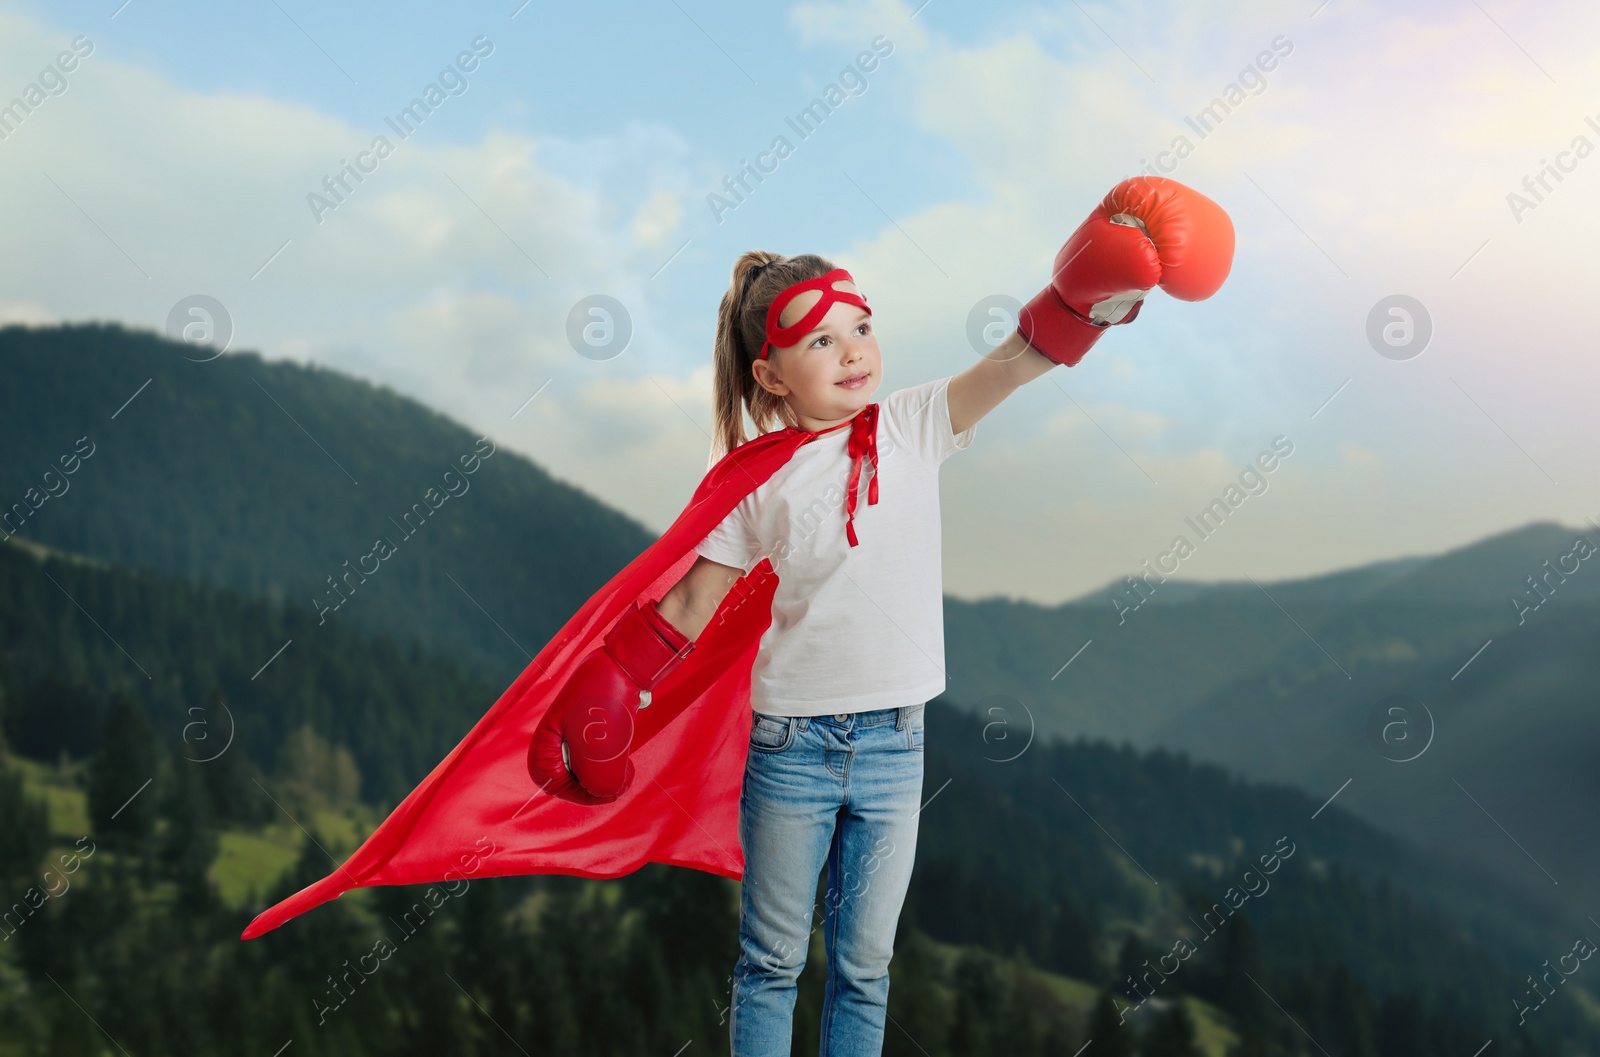 Image of Superhero, motivation and power. Cute girl in cape and boxing gloves on high top in mountains